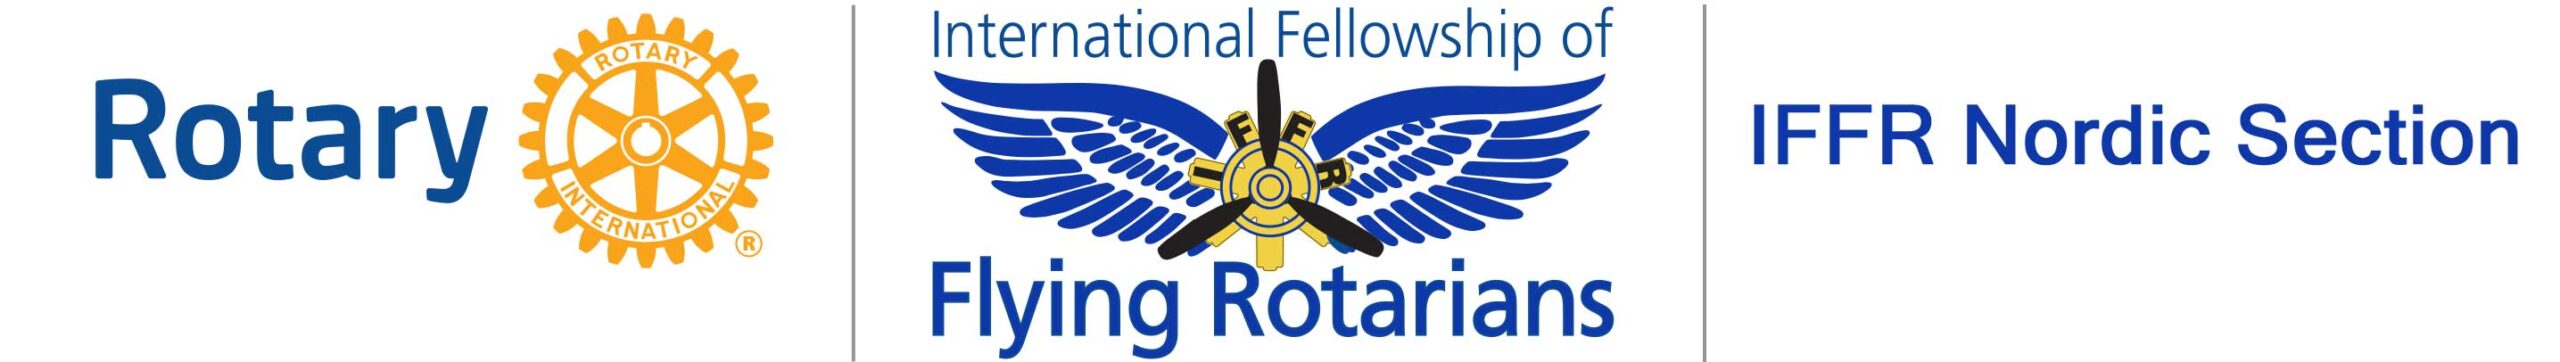 INTERNATIONAL FELLOWSHIP OF FLYING ROTARIANS NORDIC SECTION